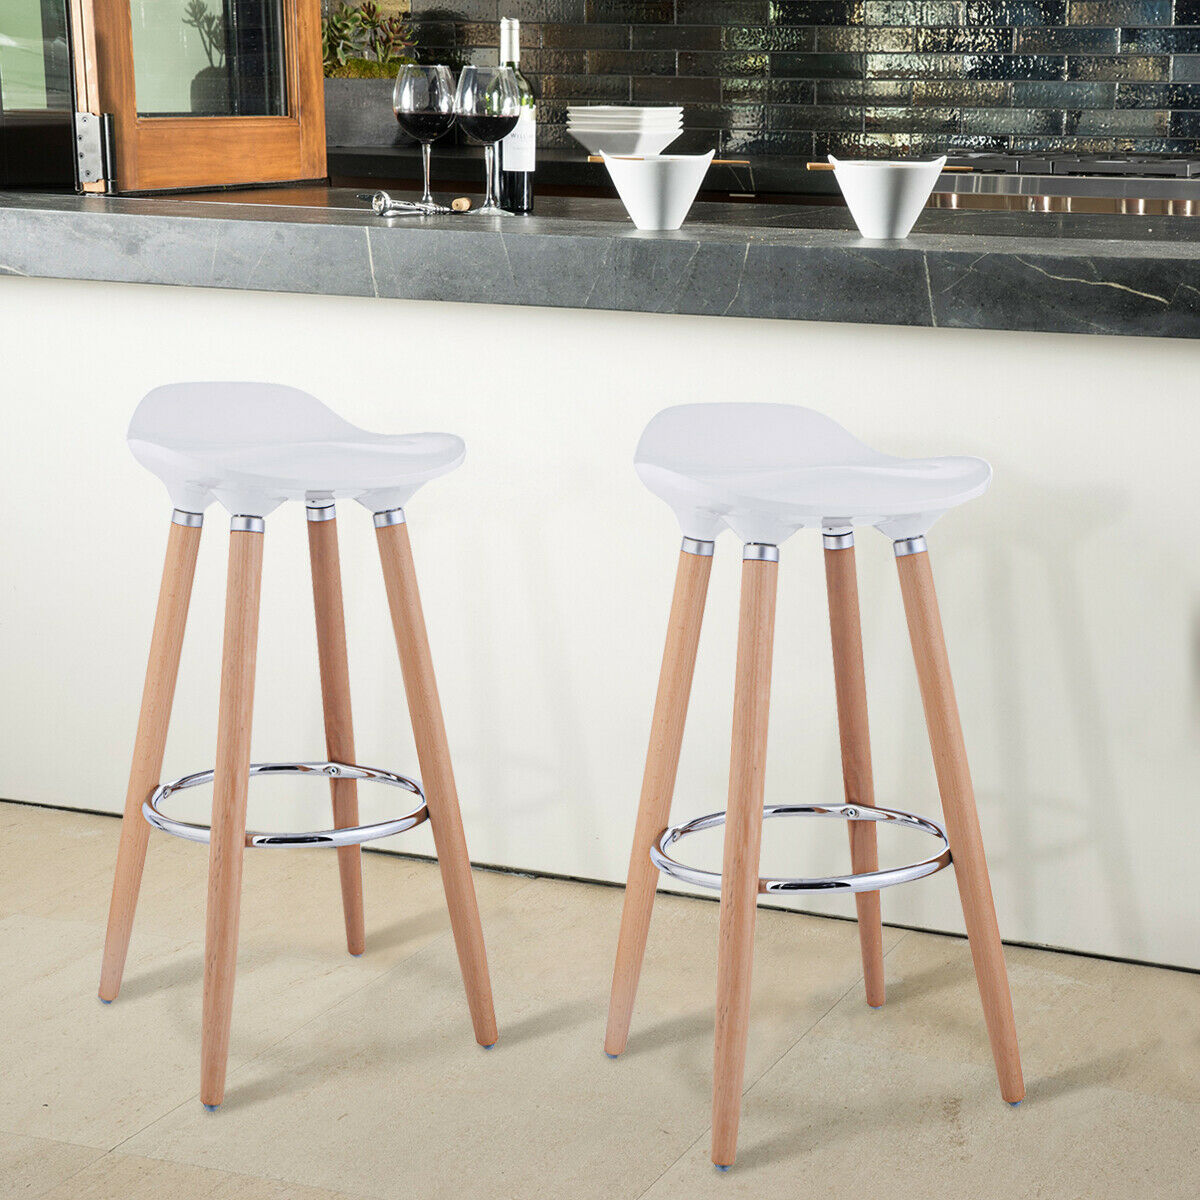 Counter Stool Set - Kitchen Stools With Wooden Legs - Set of 2